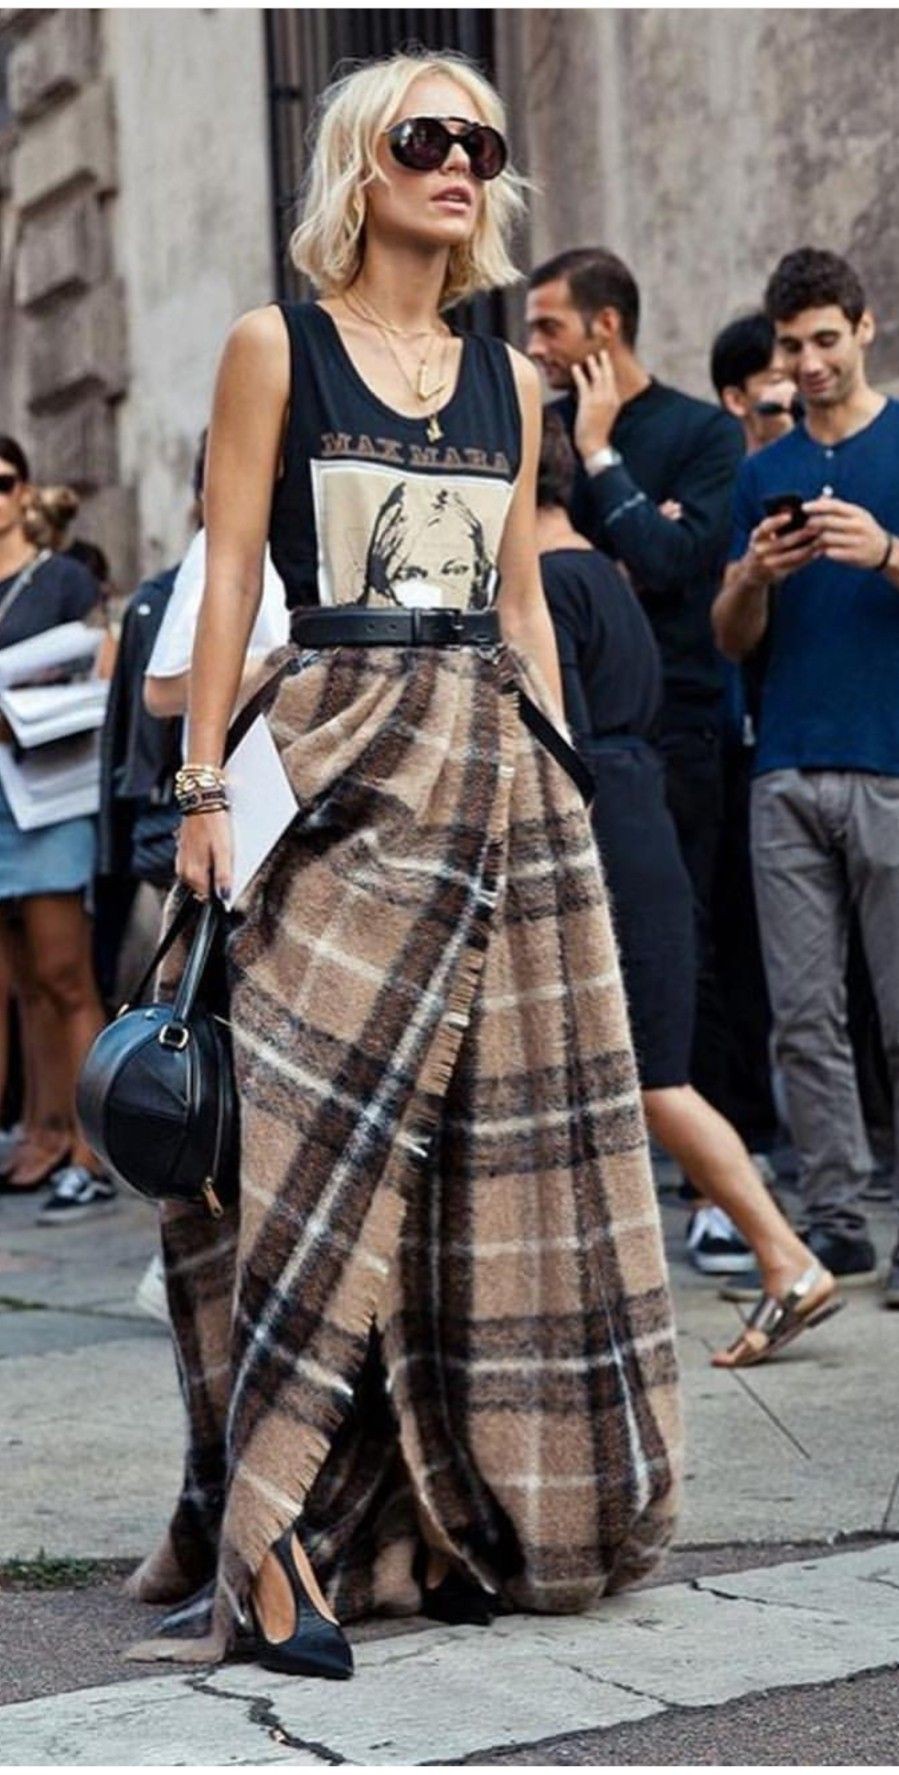 This is a new way to wear a blanket skirt! Love it | ღ Awesome fashion ...